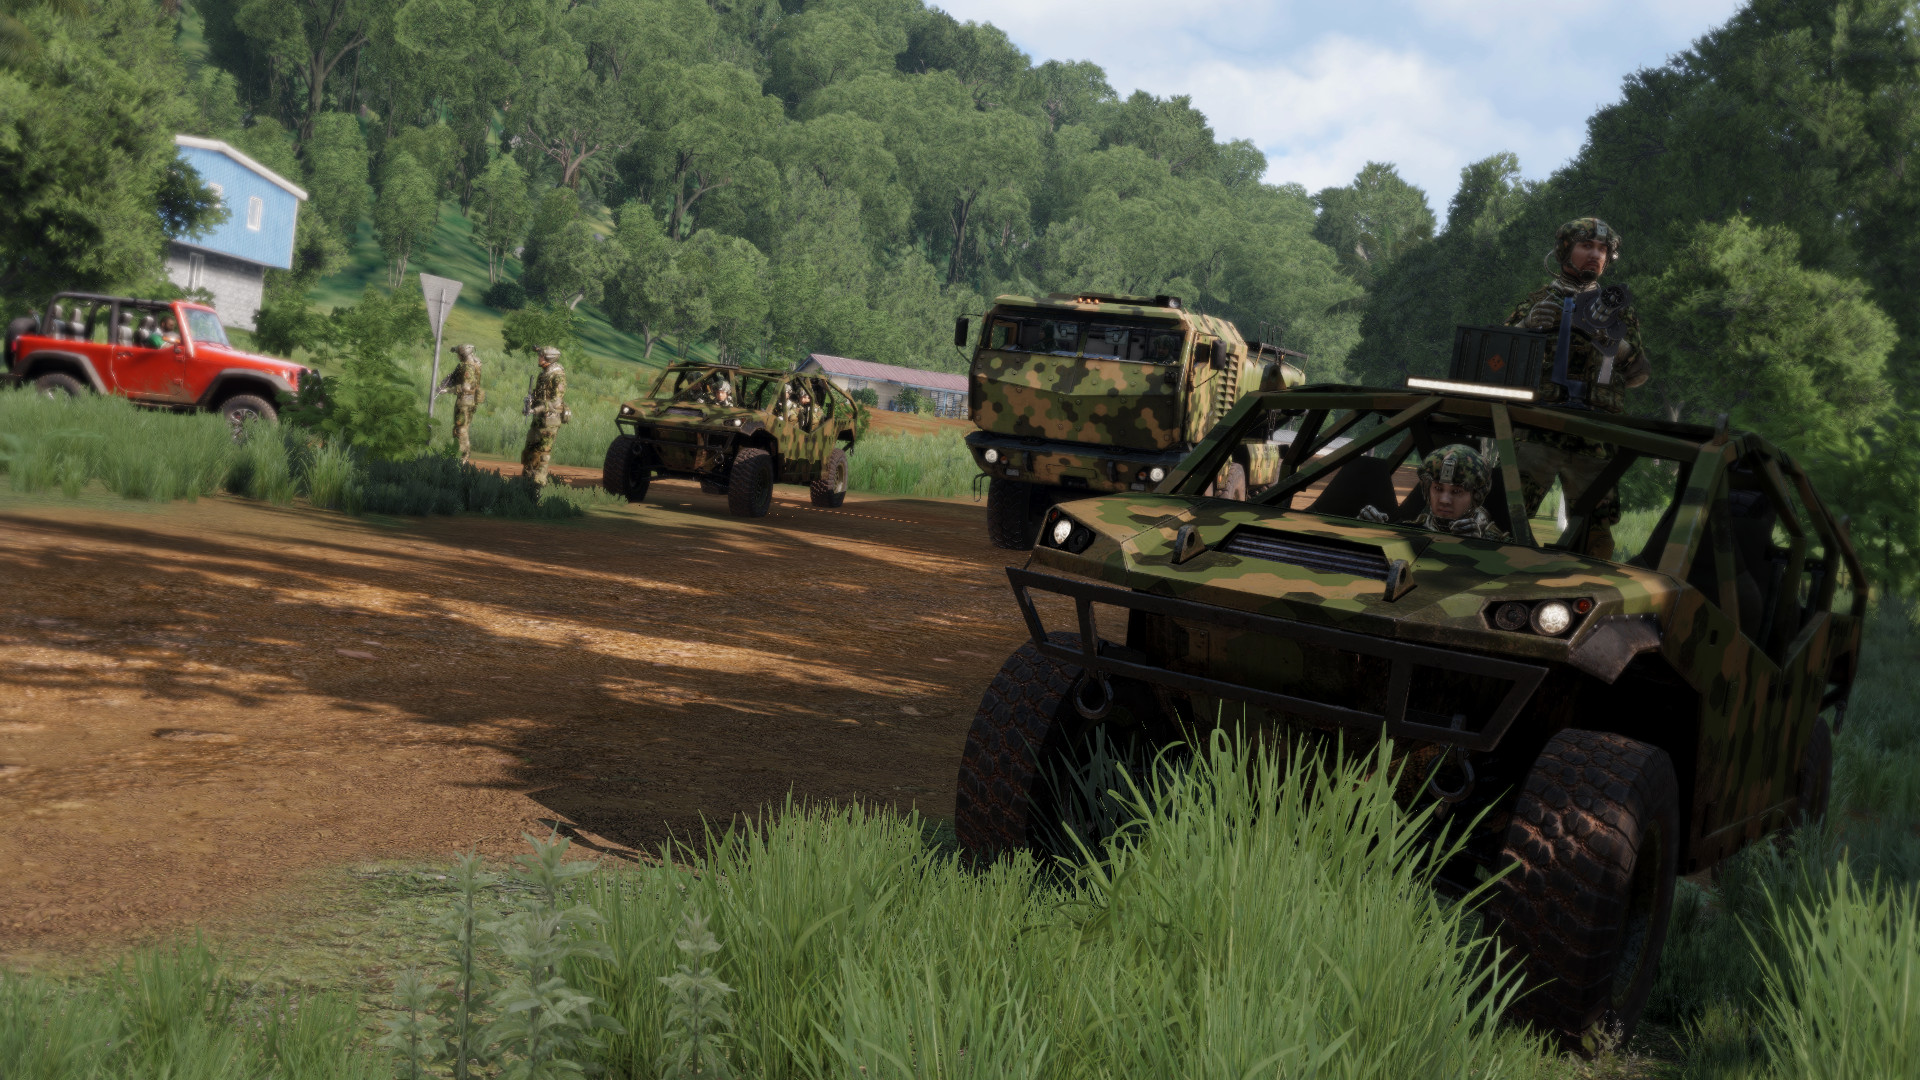 arma-3-apex-releases-on-july-11th-news-arma-3-official-website